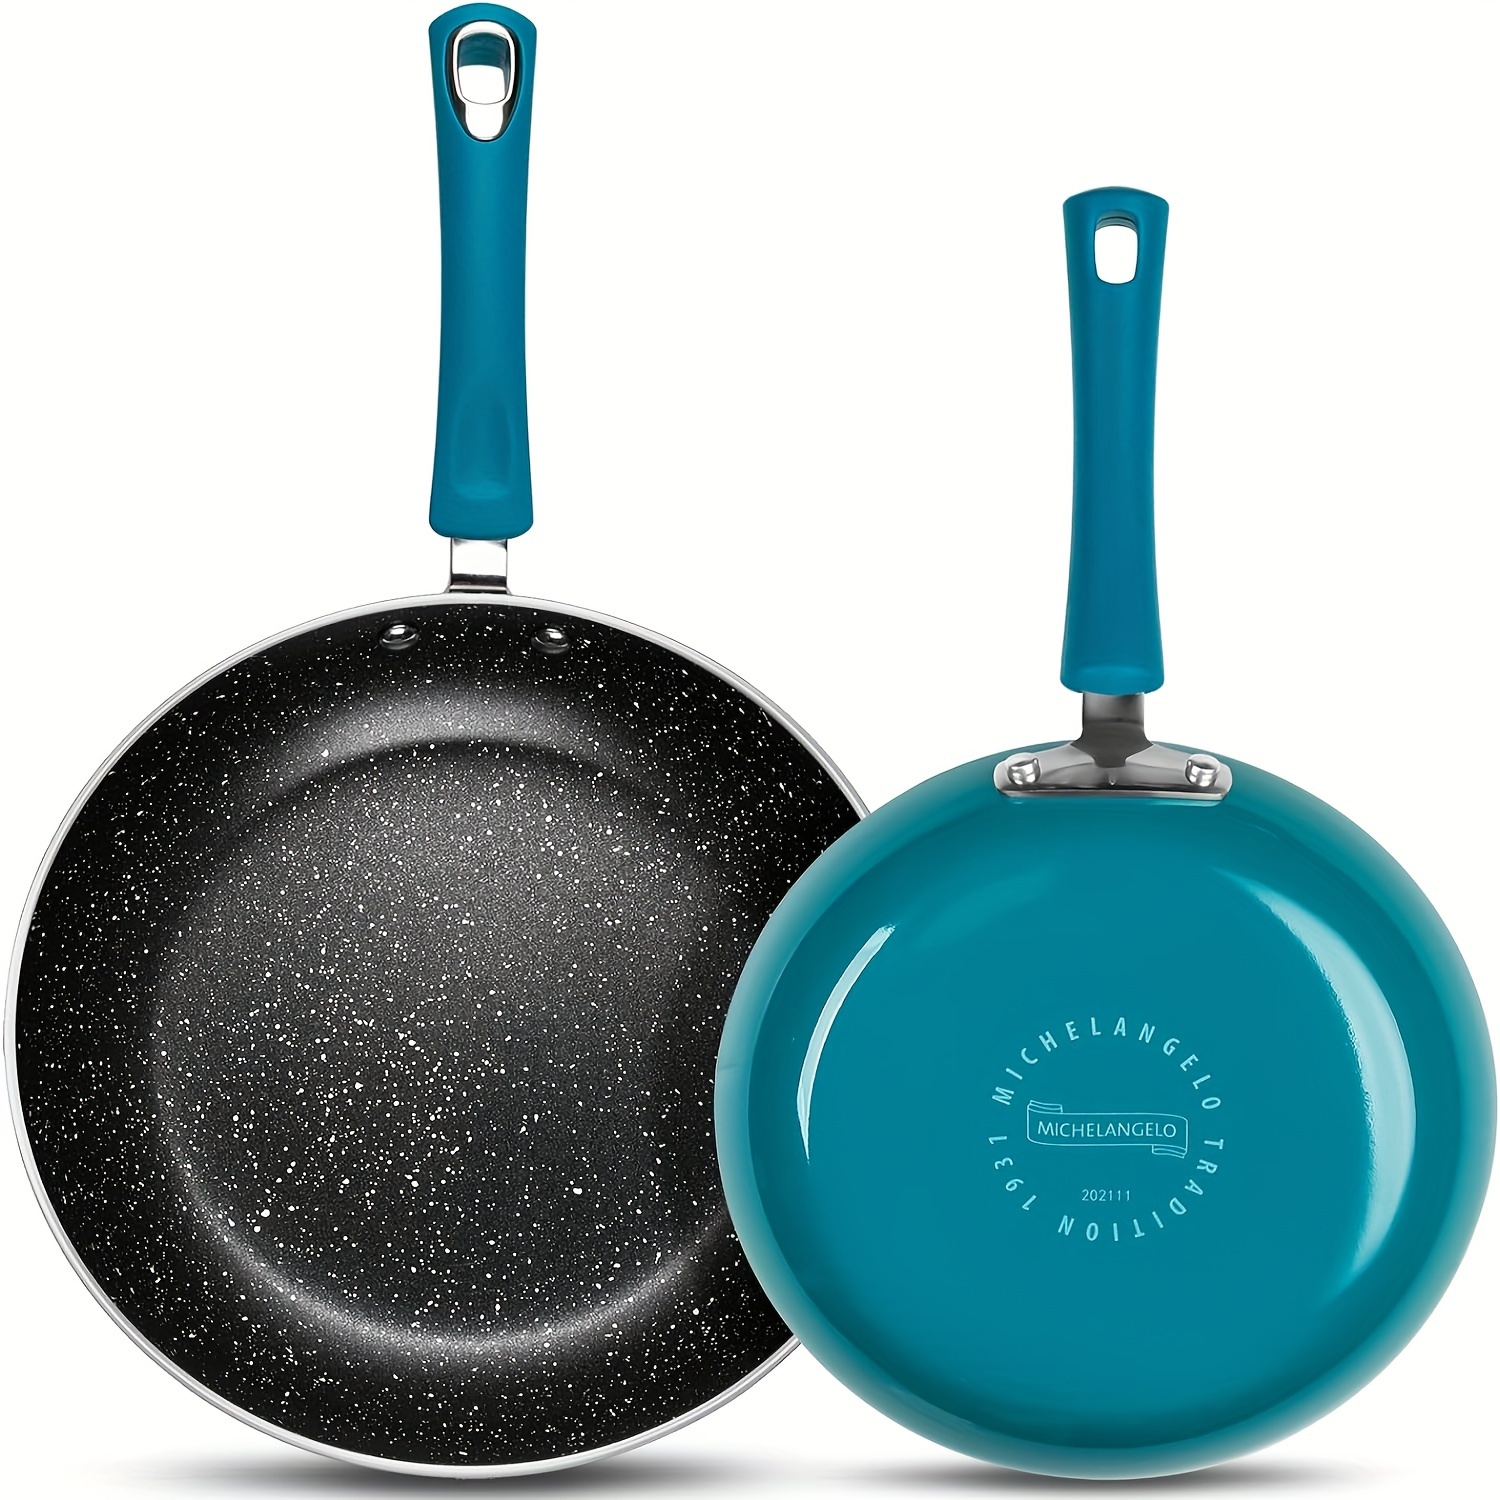 

1set, Frying Pan Set, Non-stick Skillet, Teal Blue, Stainless Steel Handle, Kitchen Cookware, Kitchenware